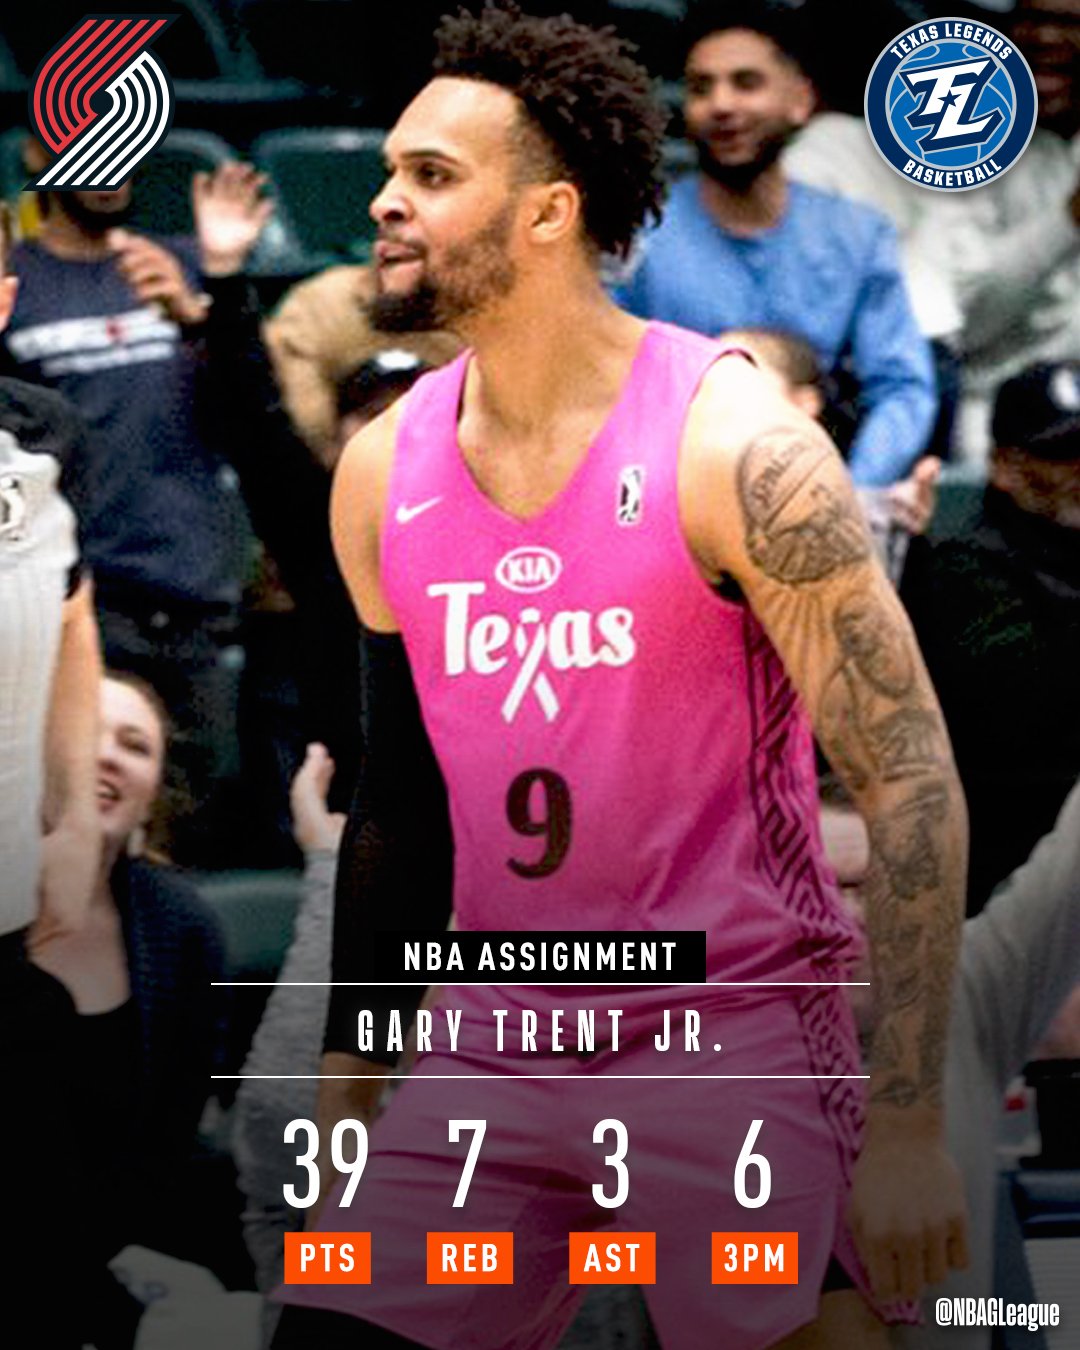 LeagueFits on X: the replies have been asking for gary trent jr